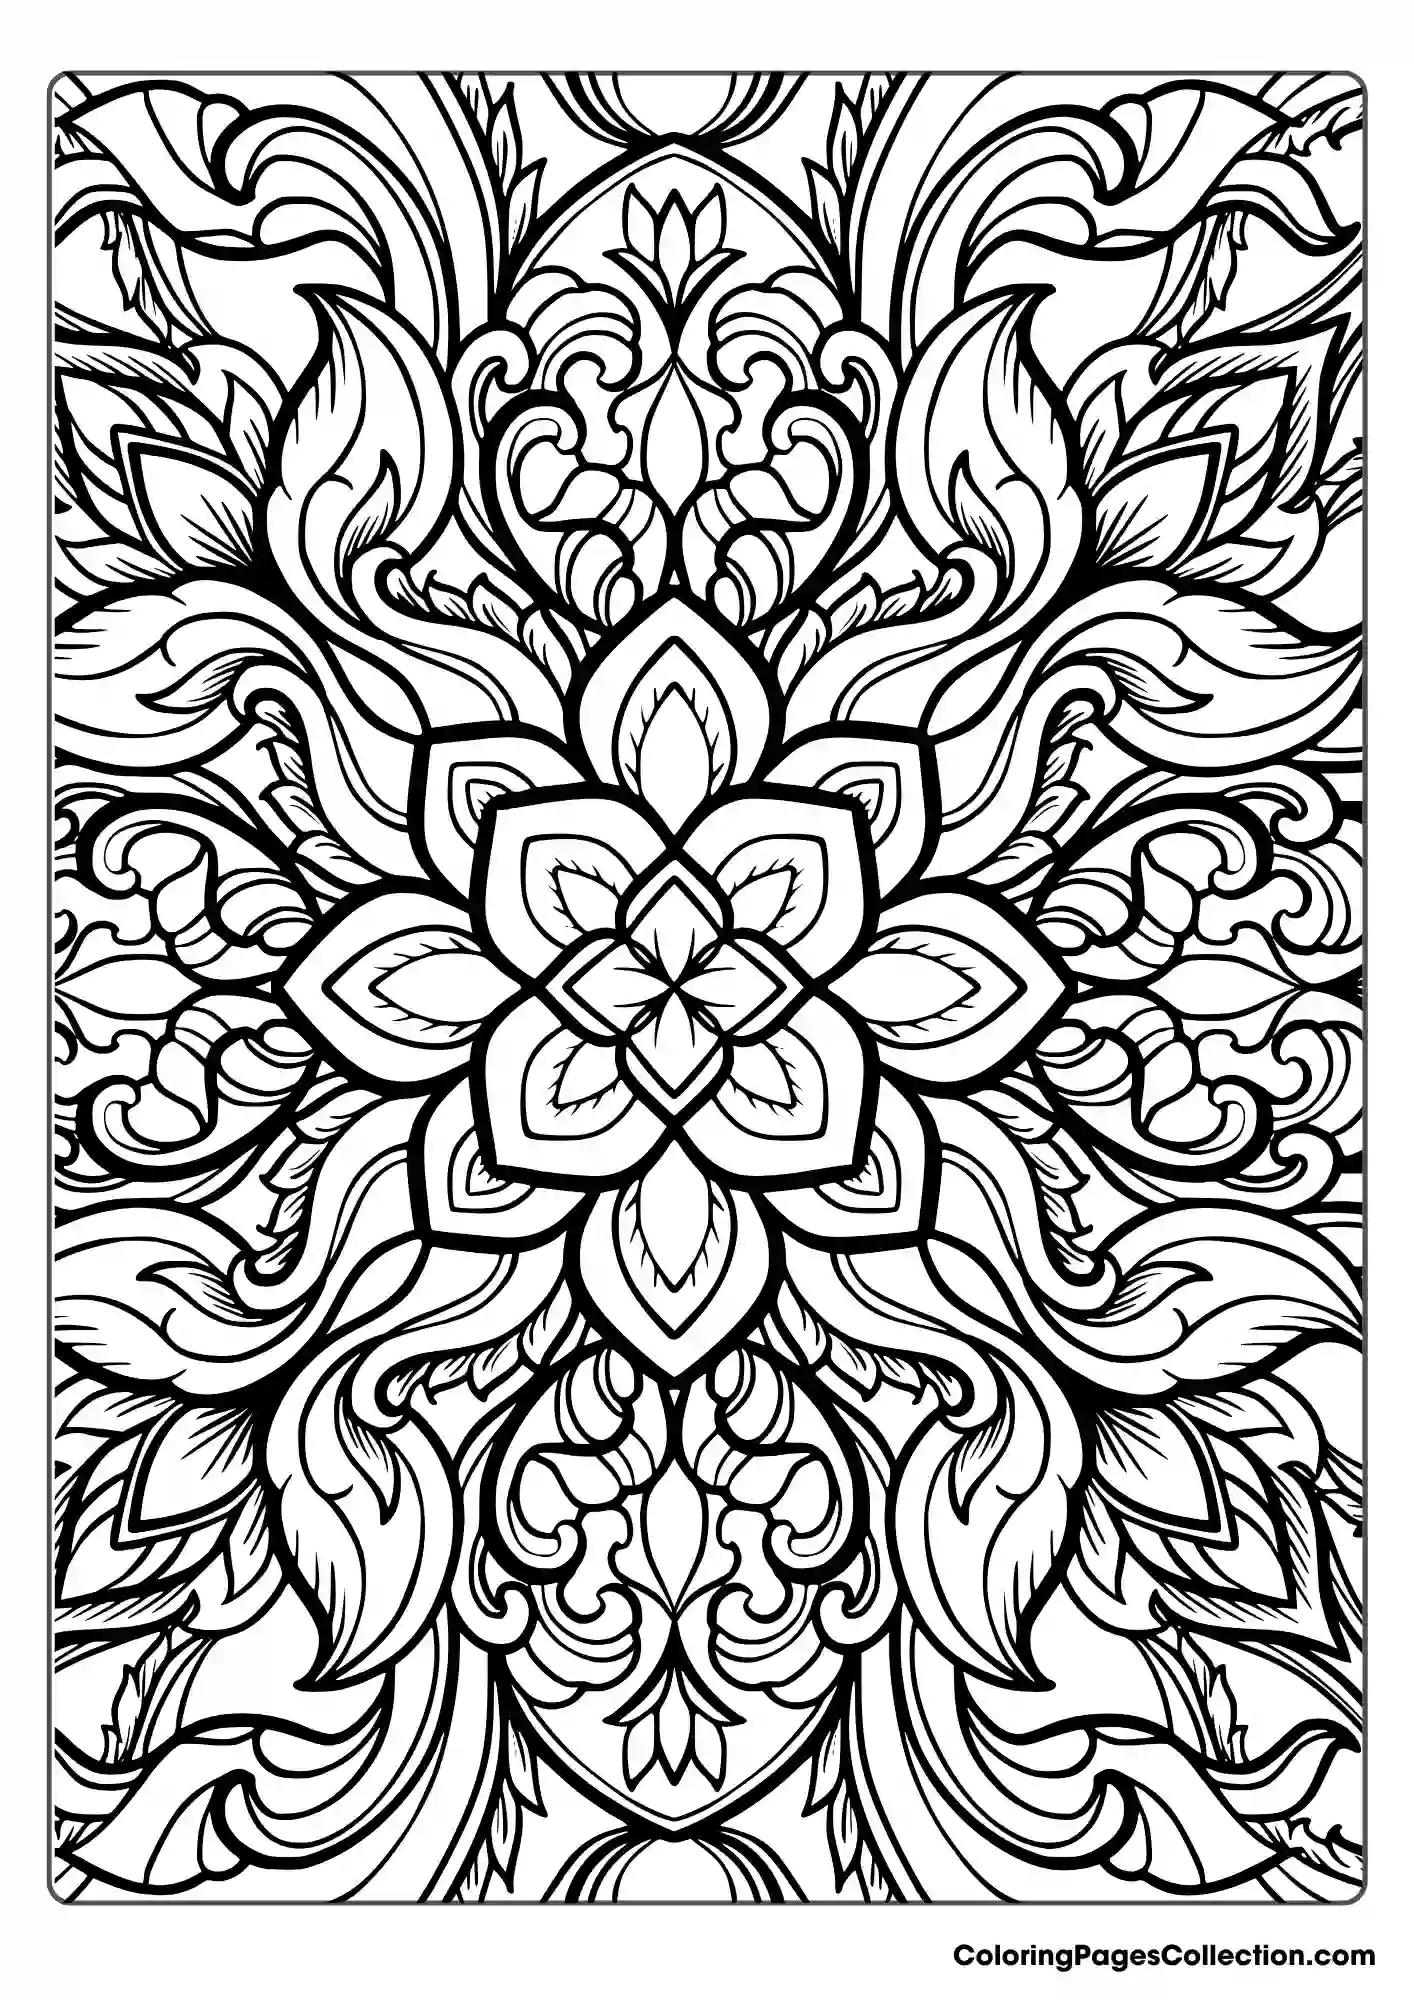 Anxiety Coloring Pages